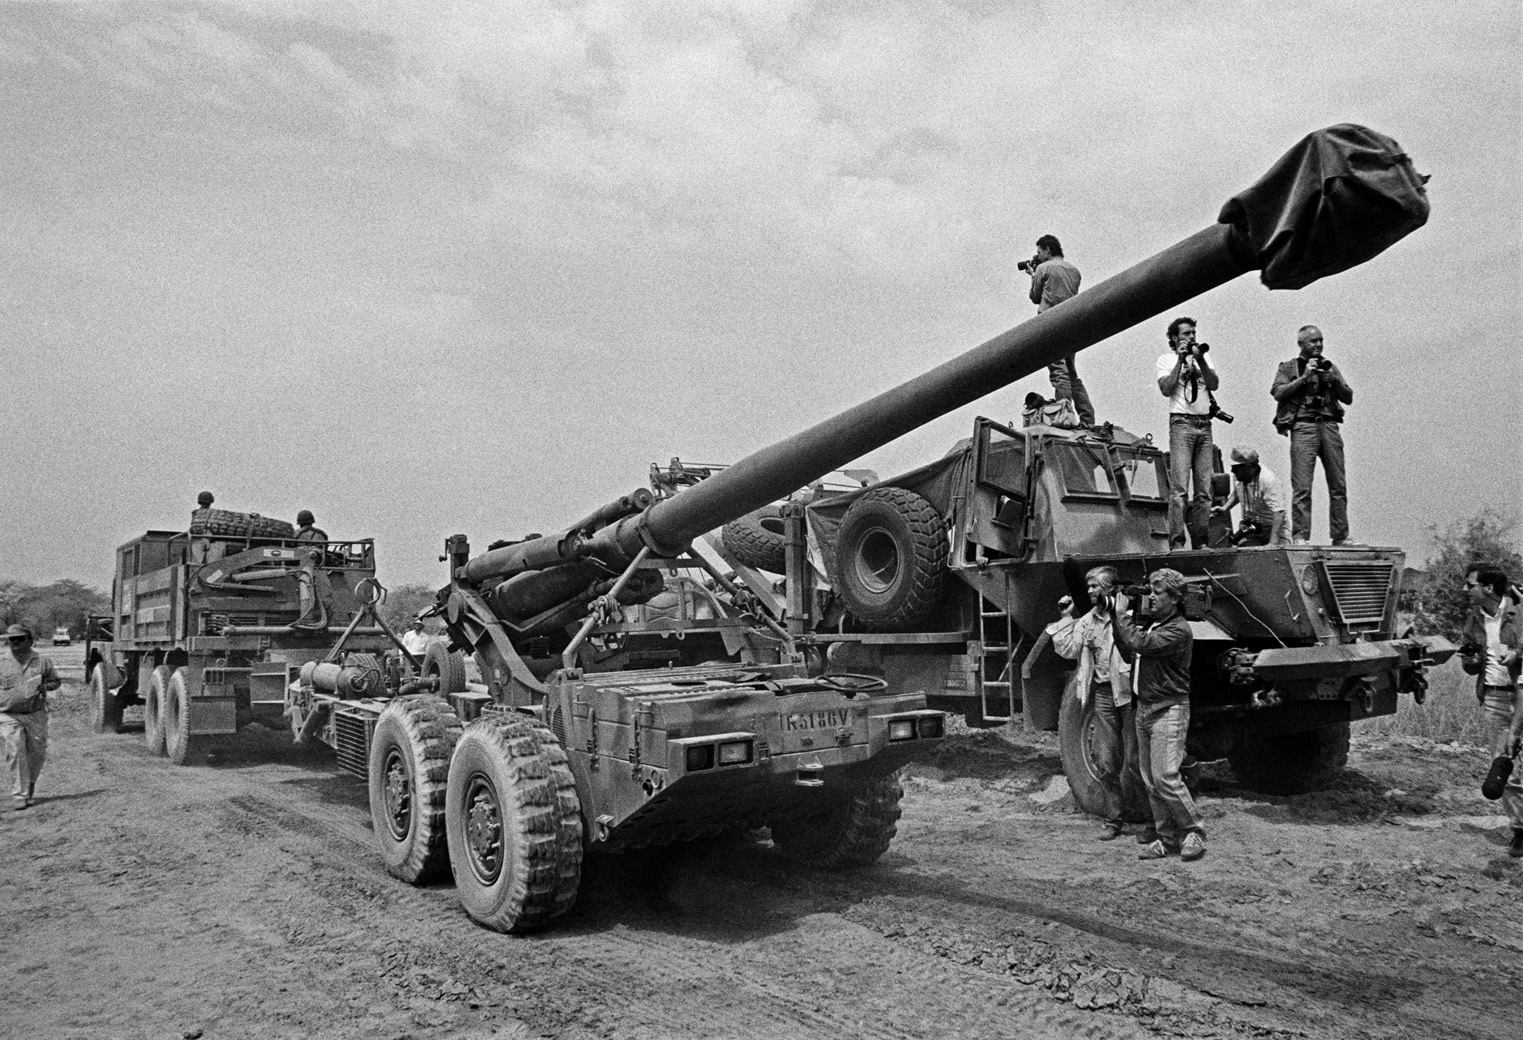 A South African vehicle tows a 155 mm “G5” howitzer during the country's withdrawal from southern Angola in 1988. The G5 played a crucial role in disrupting enemy logistics.